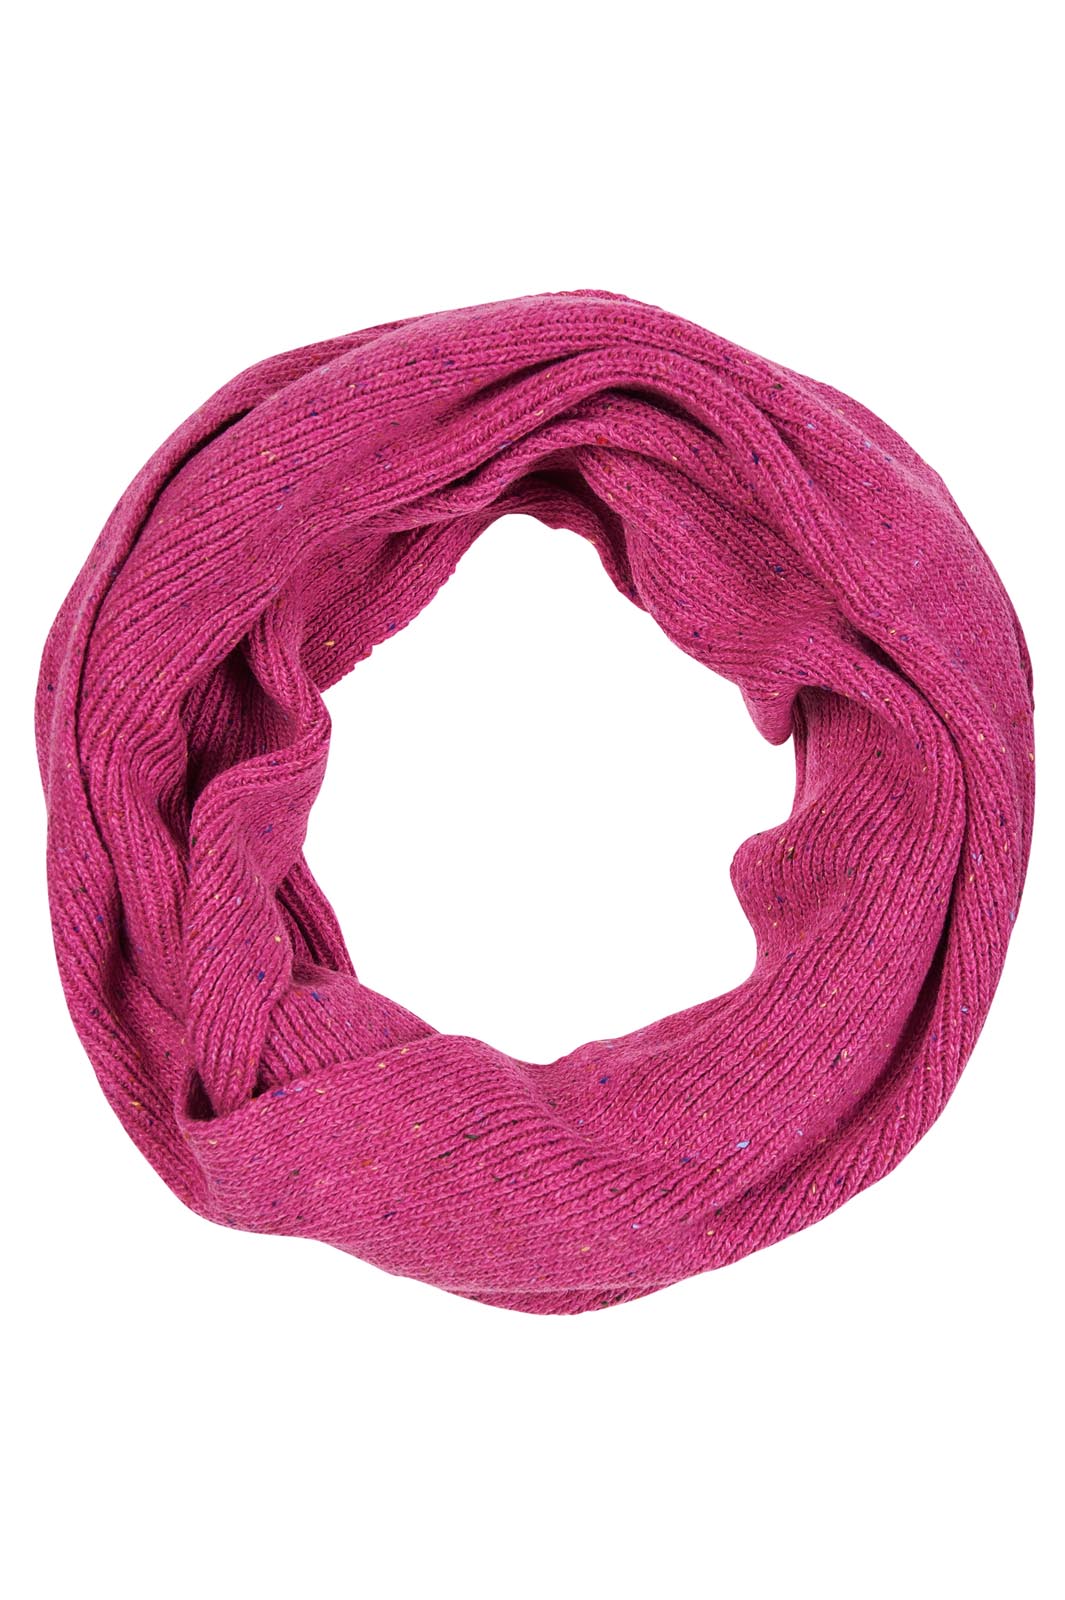 Diaz Snood - Mulberry - eb&ive Scarves